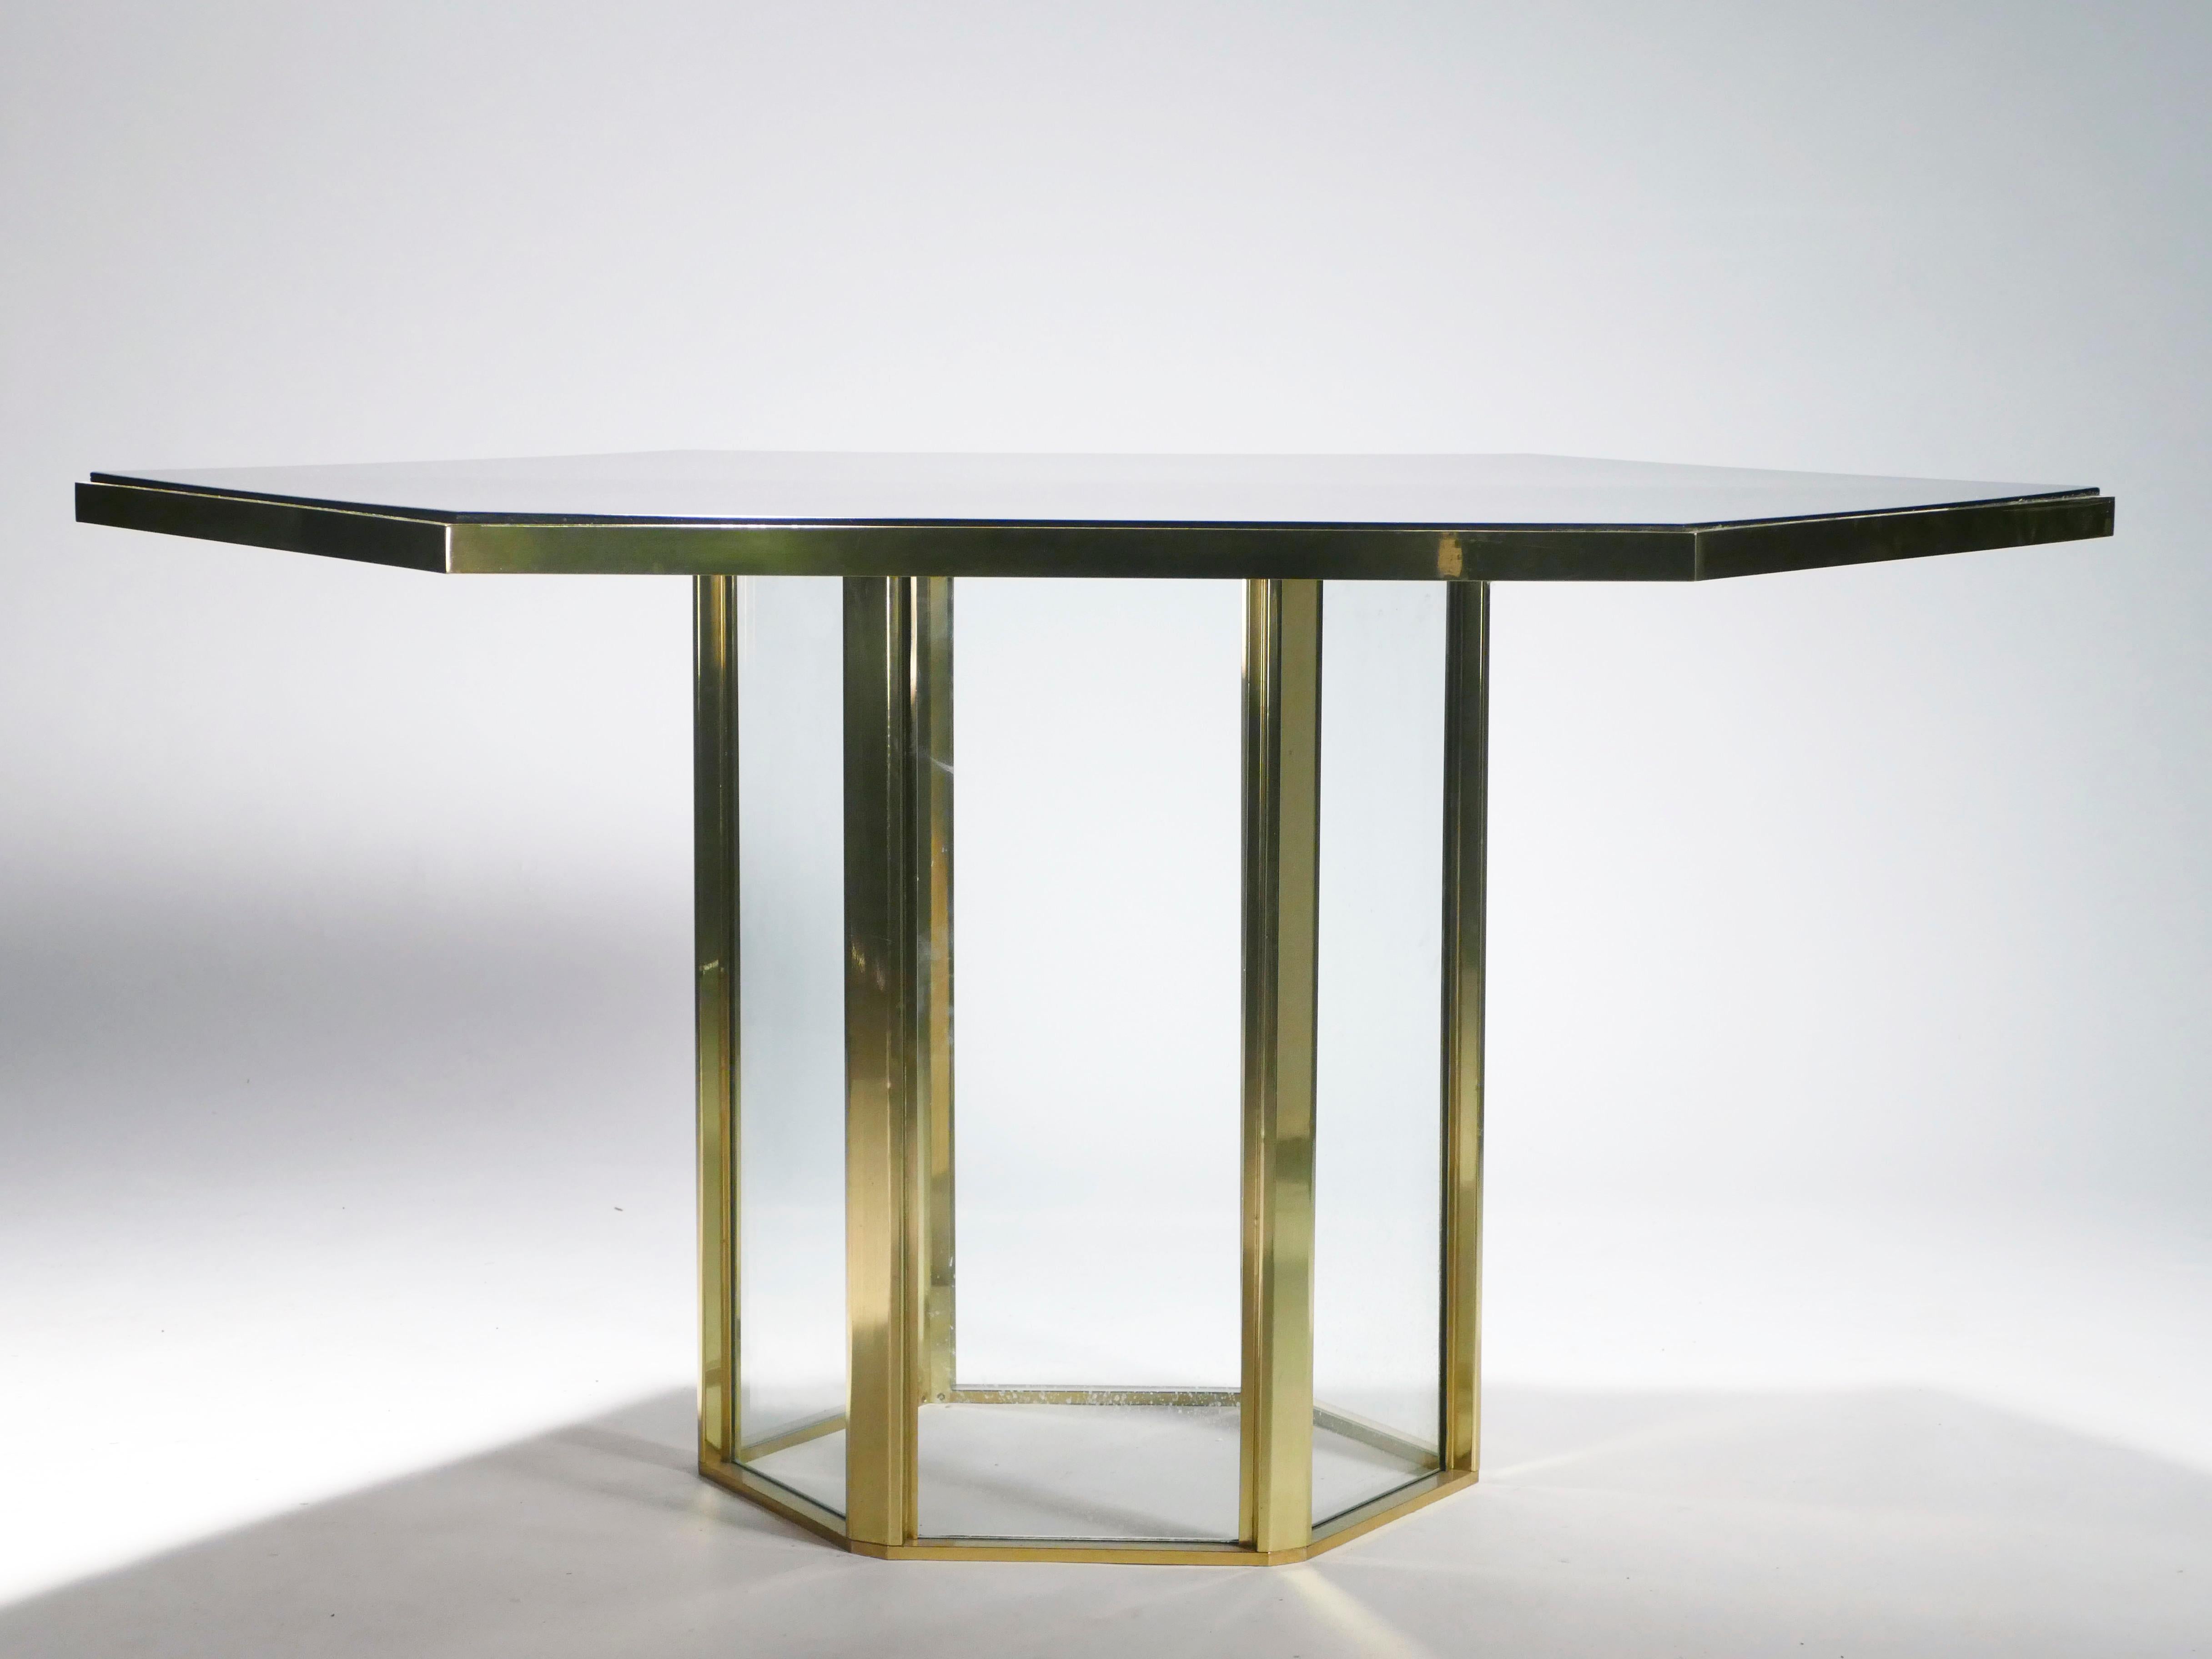 Hollywood Regency Midcentury Romeo Rega Black Lacquer Brass and Glass Dining Table, 1970s For Sale